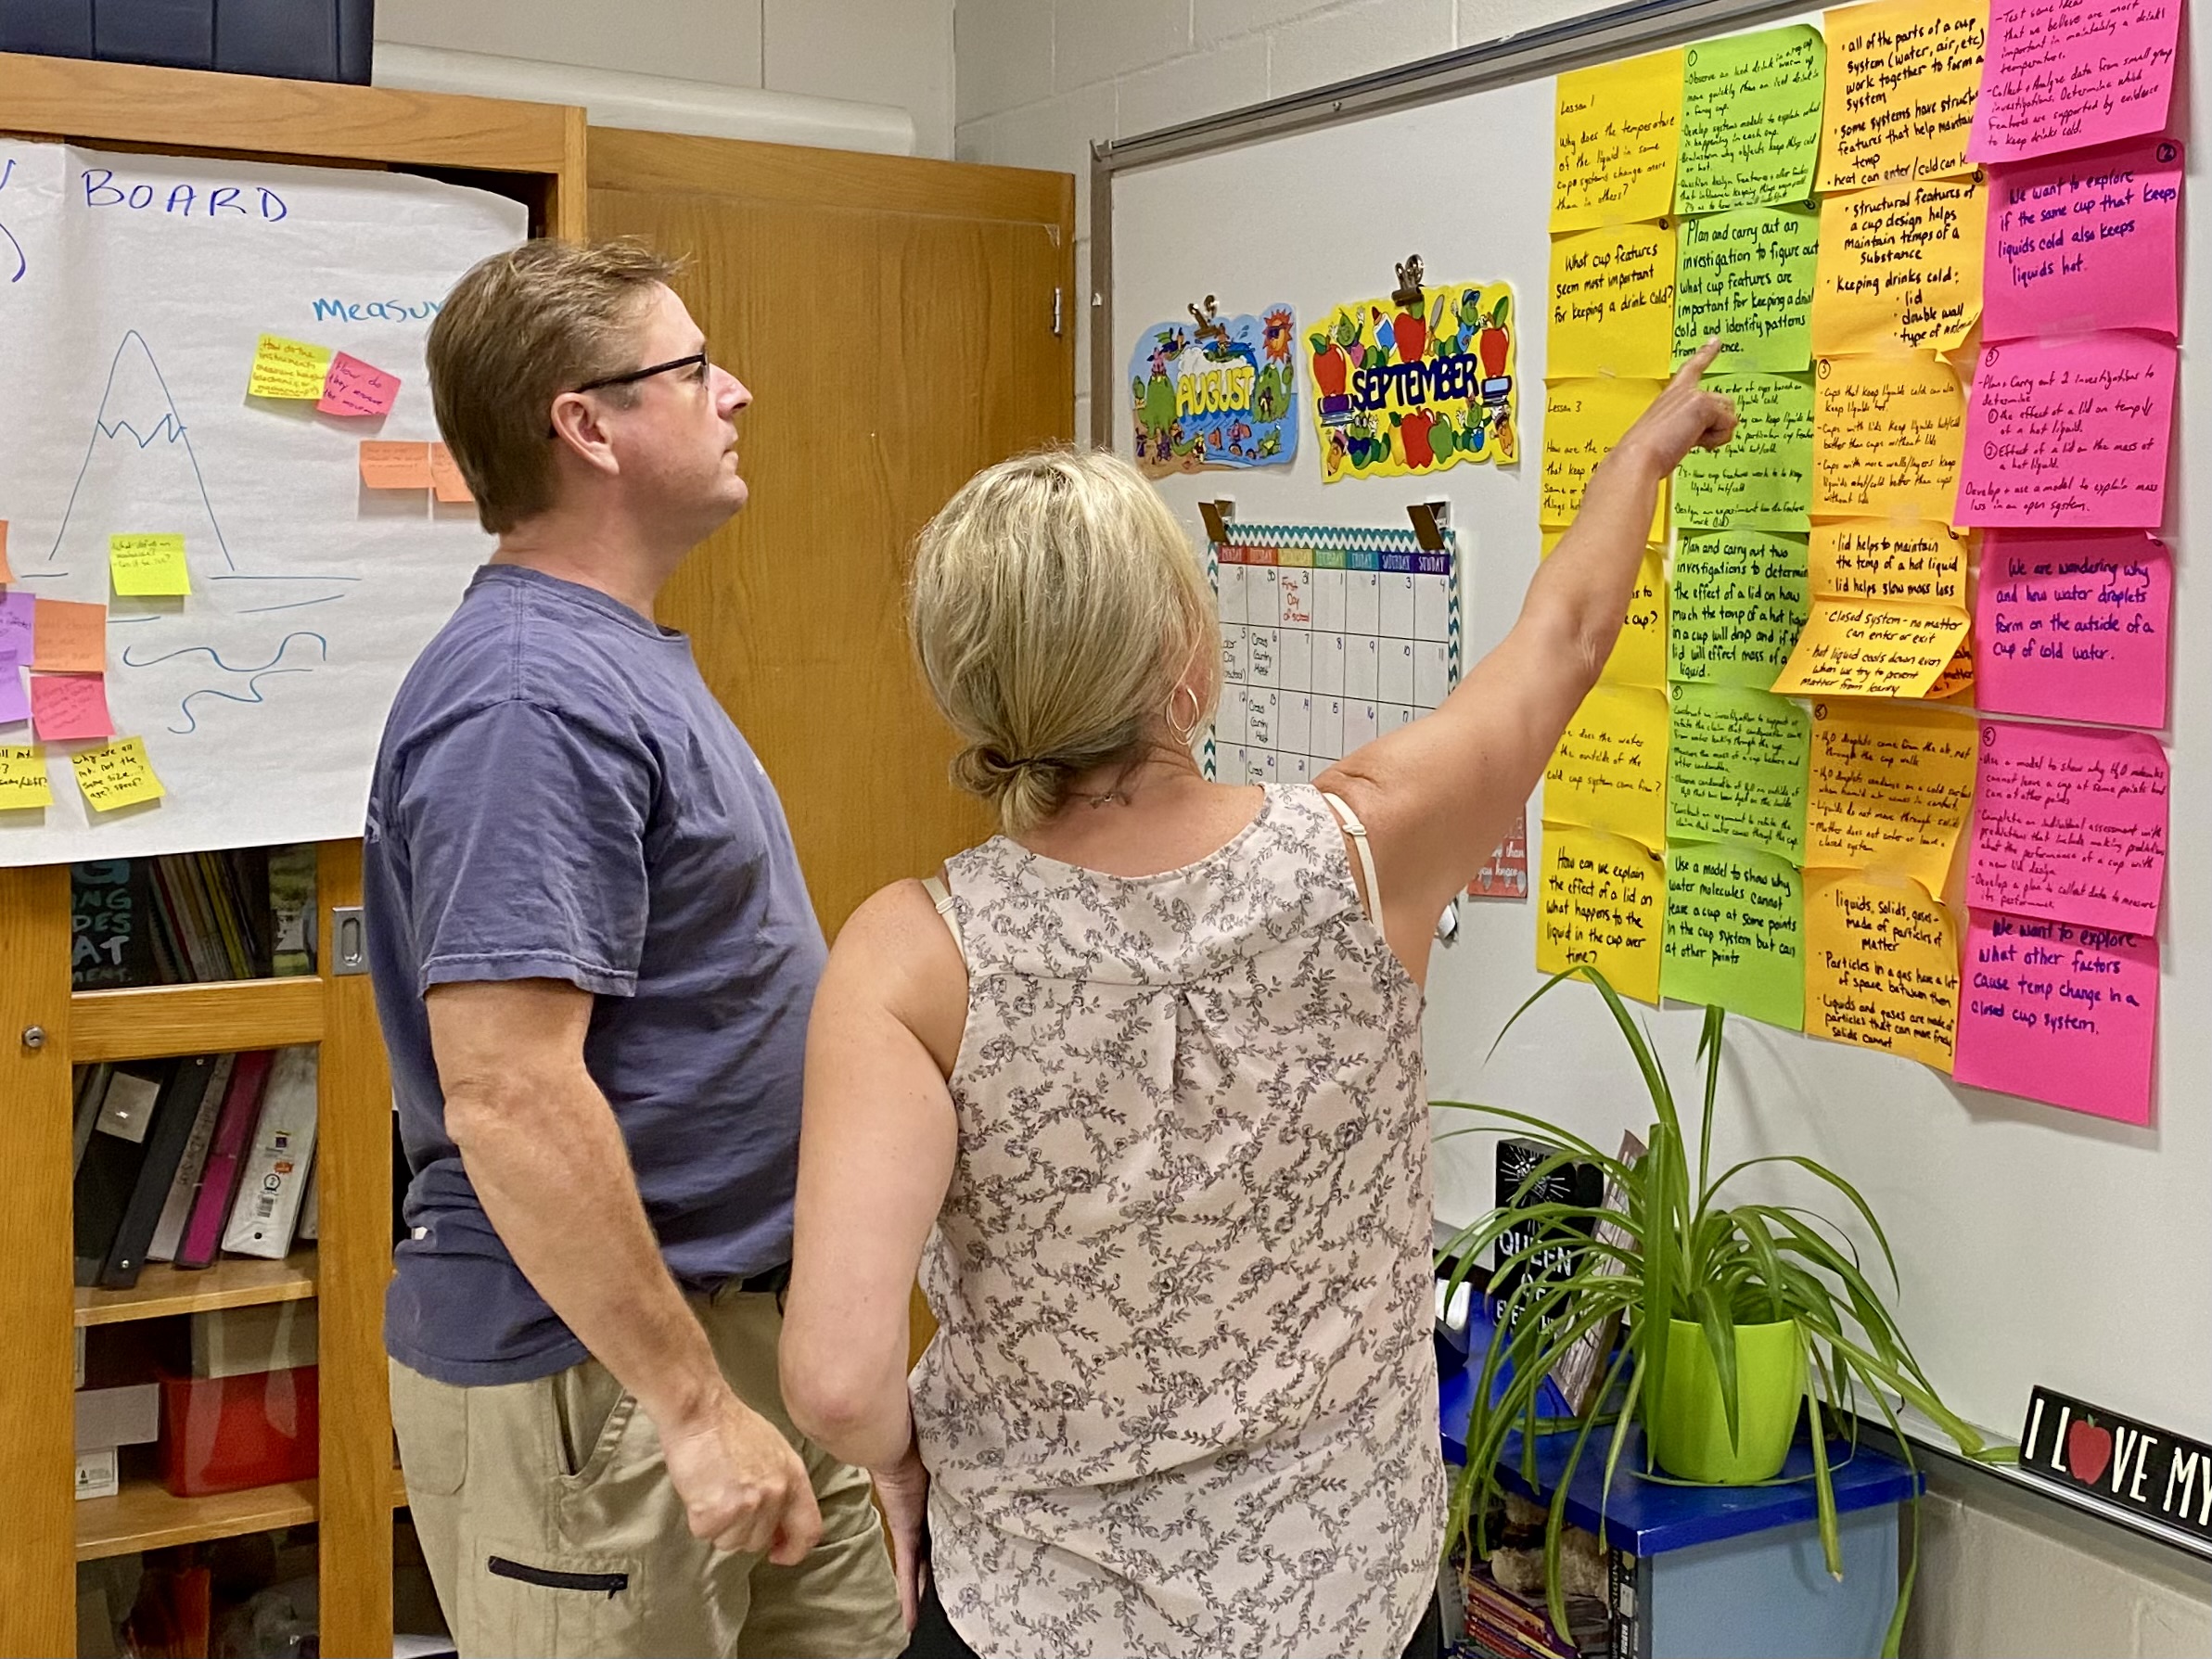 Two teachers review a board with sticky notes organized in columns.